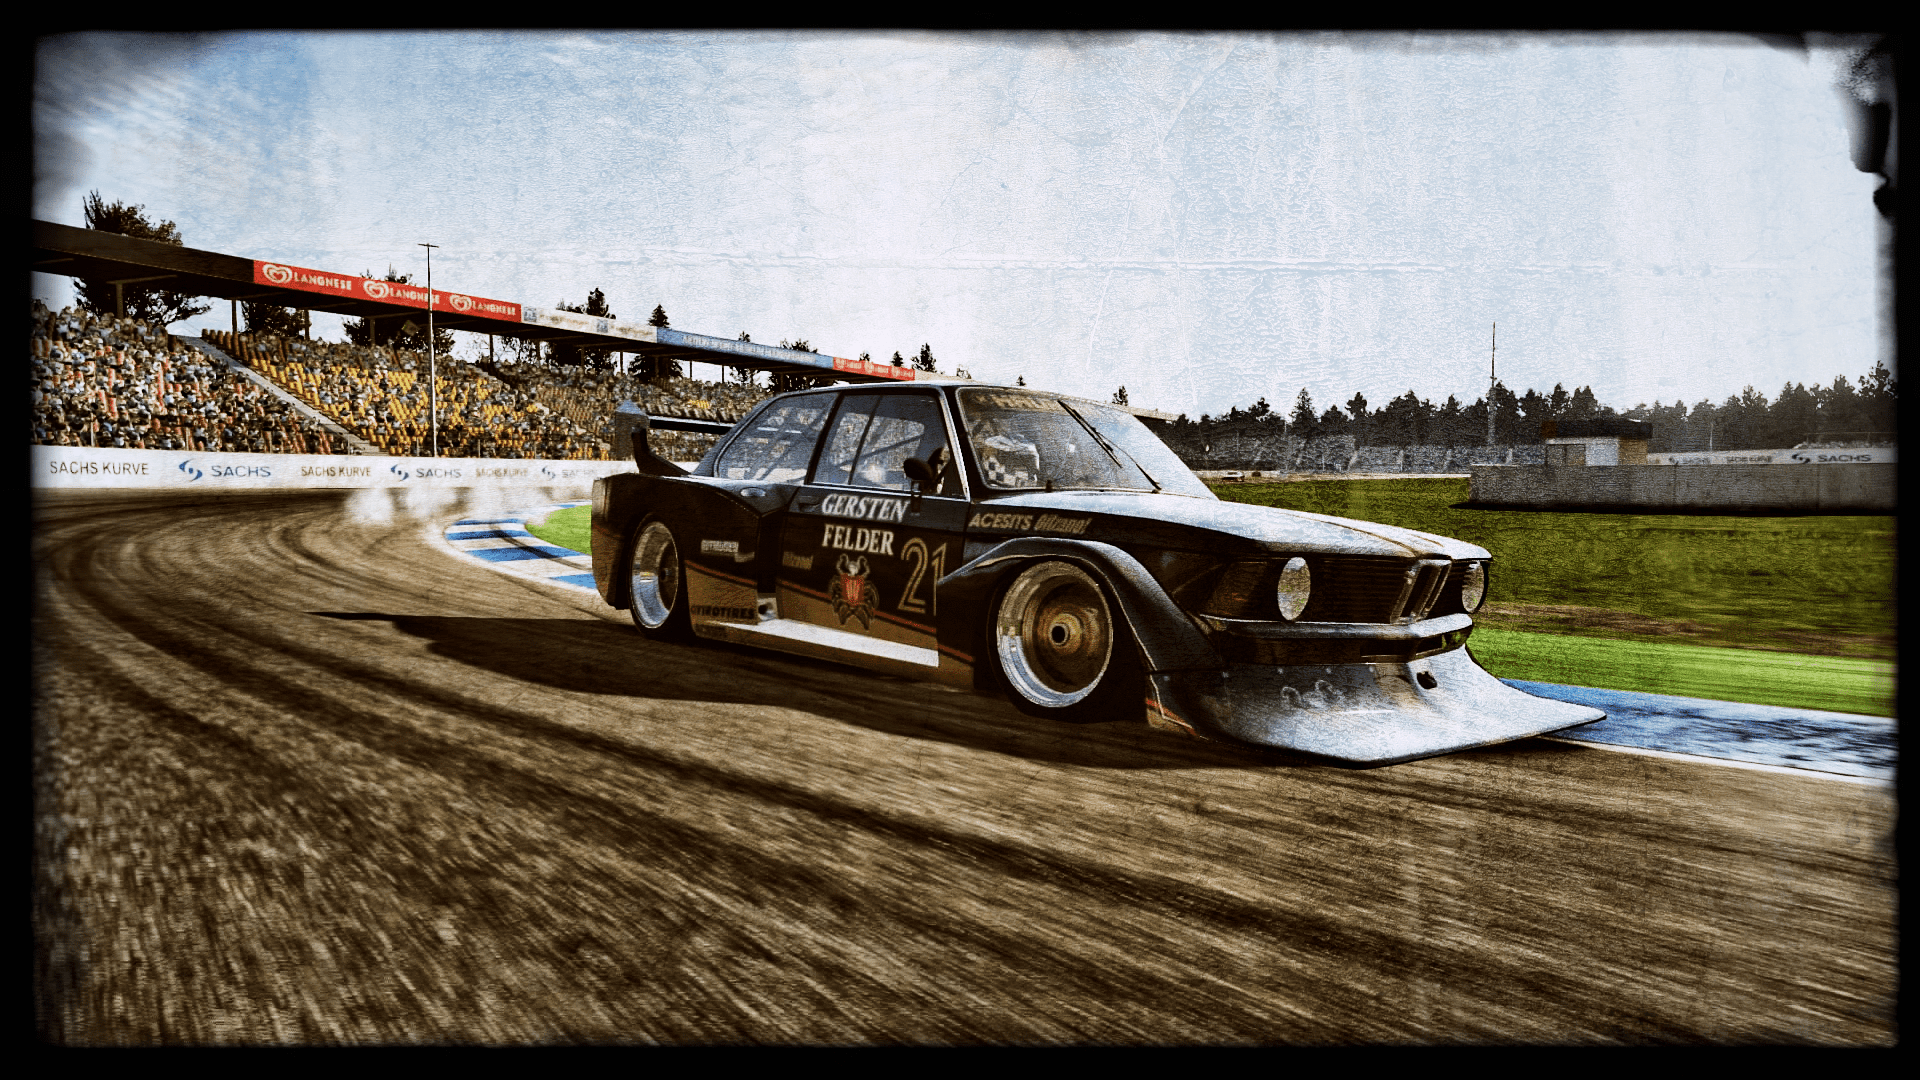 Project CARS Historic GT5 4